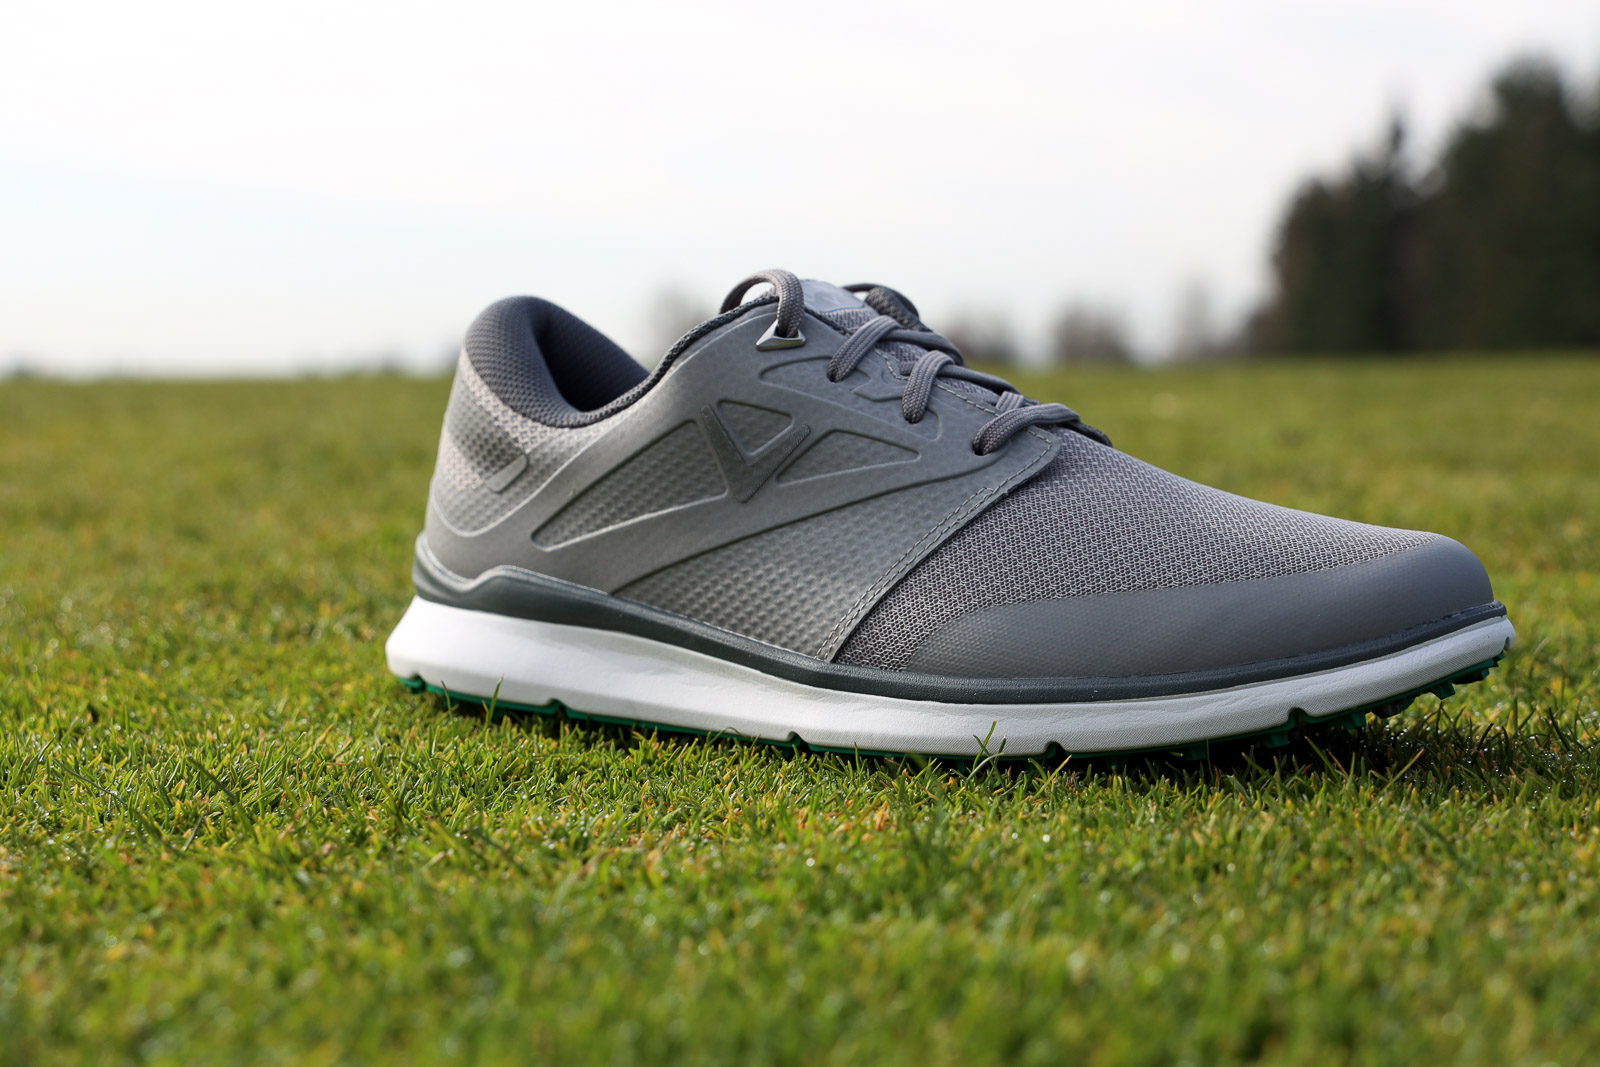 Callaway Golf Shoes: Is the Oceanside 